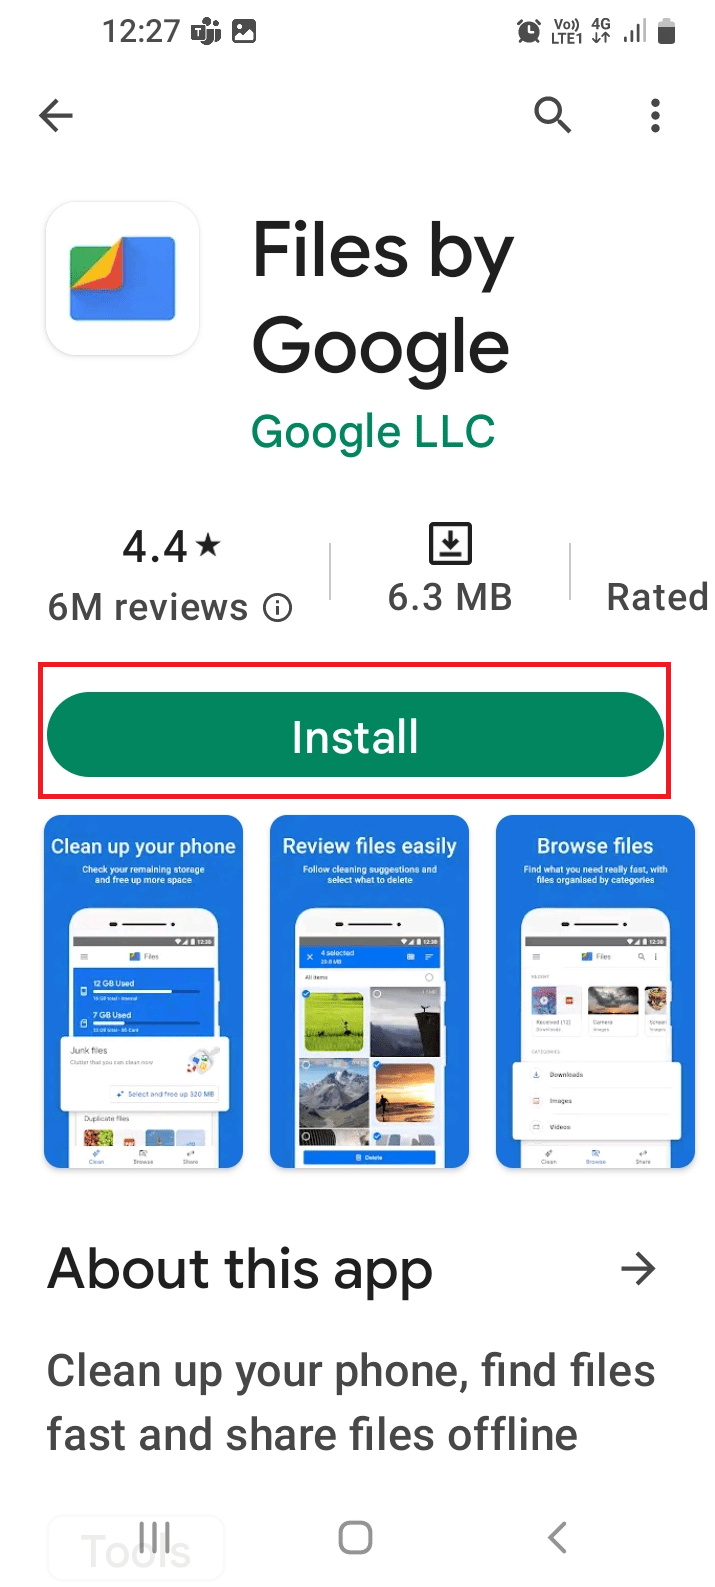 search for the Files by Google app and tap on the Install button